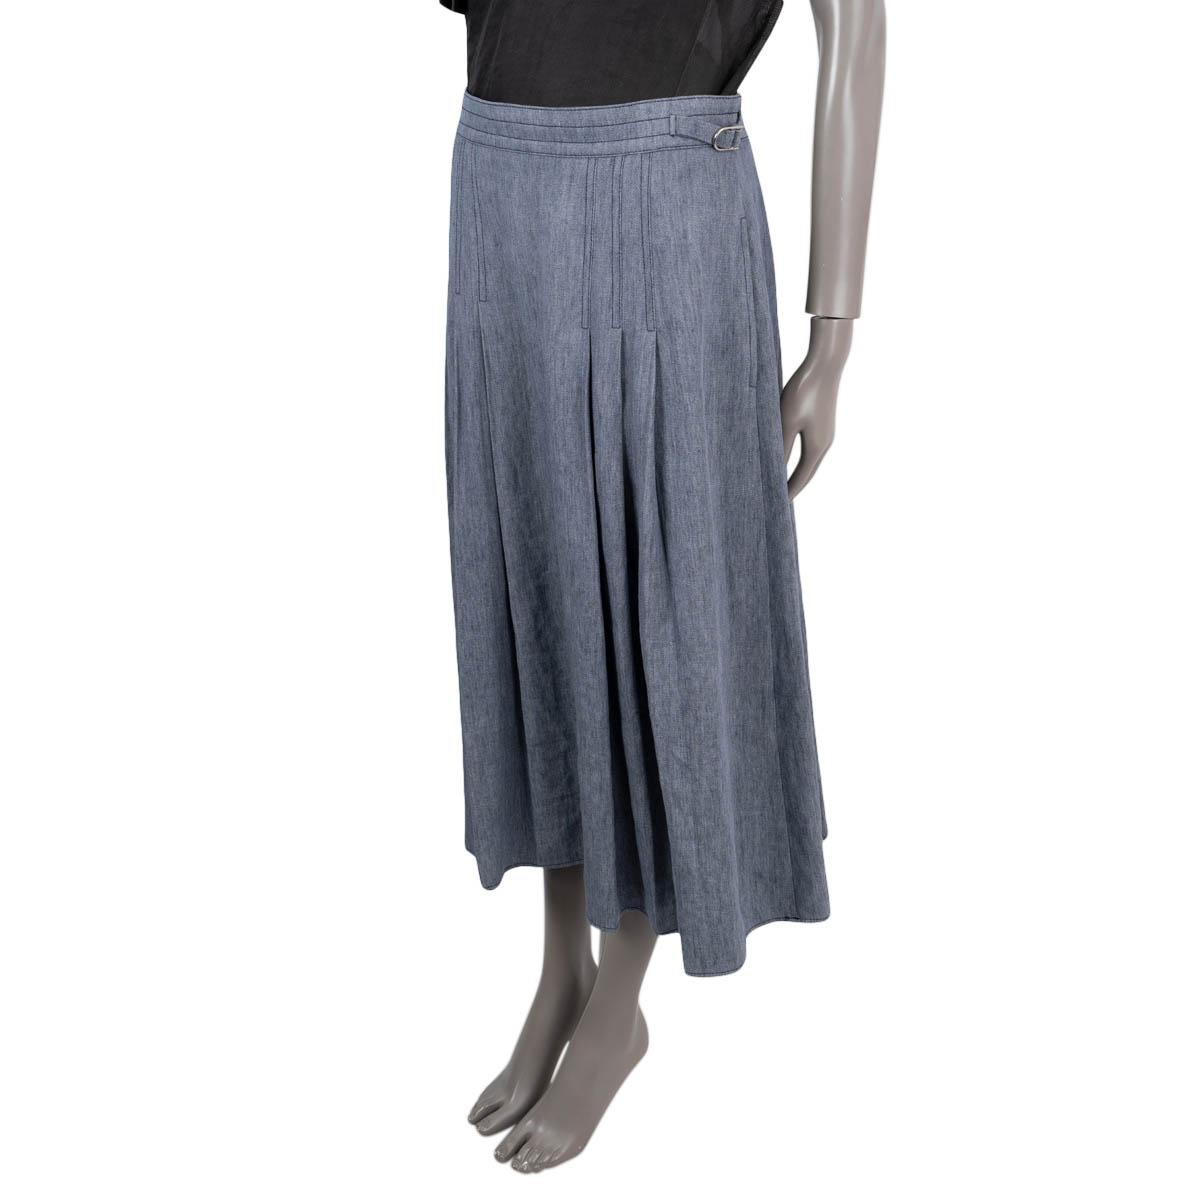 100% authentic Gabriela Hearst Lerna midi skirt in light denim blue linen (100%). Features an A-line silhouette, adjustable waist tabs, exacting pleats and two slit pockets. Closes with a zipper in the back and is lined in cupro (100%). Has been